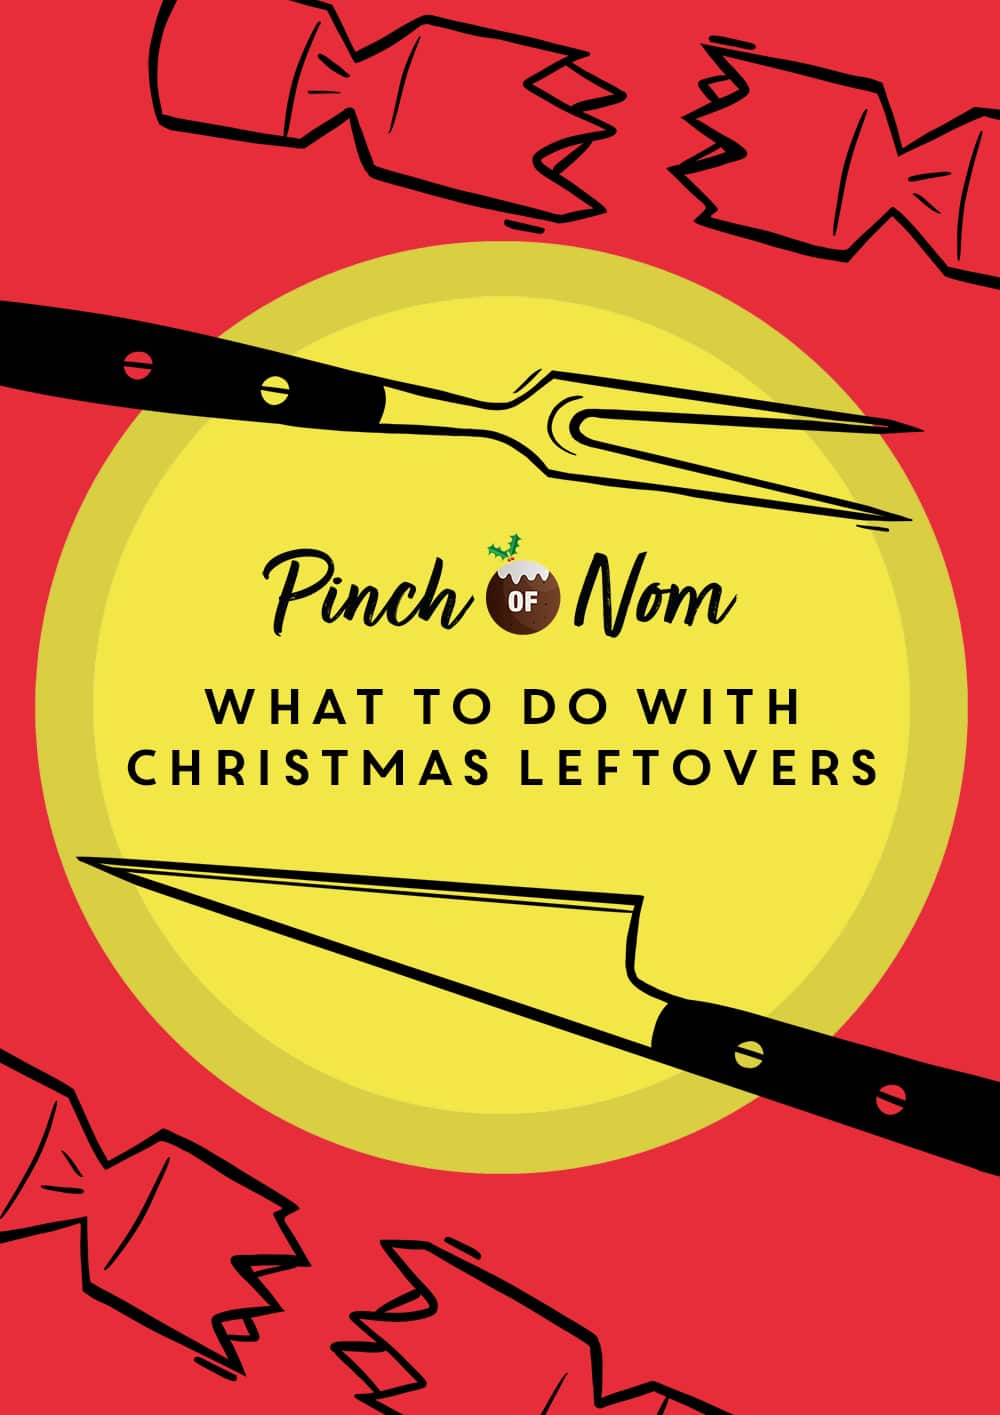 What to do with Christmas leftovers - Pinch of Nom Slimming Recipes